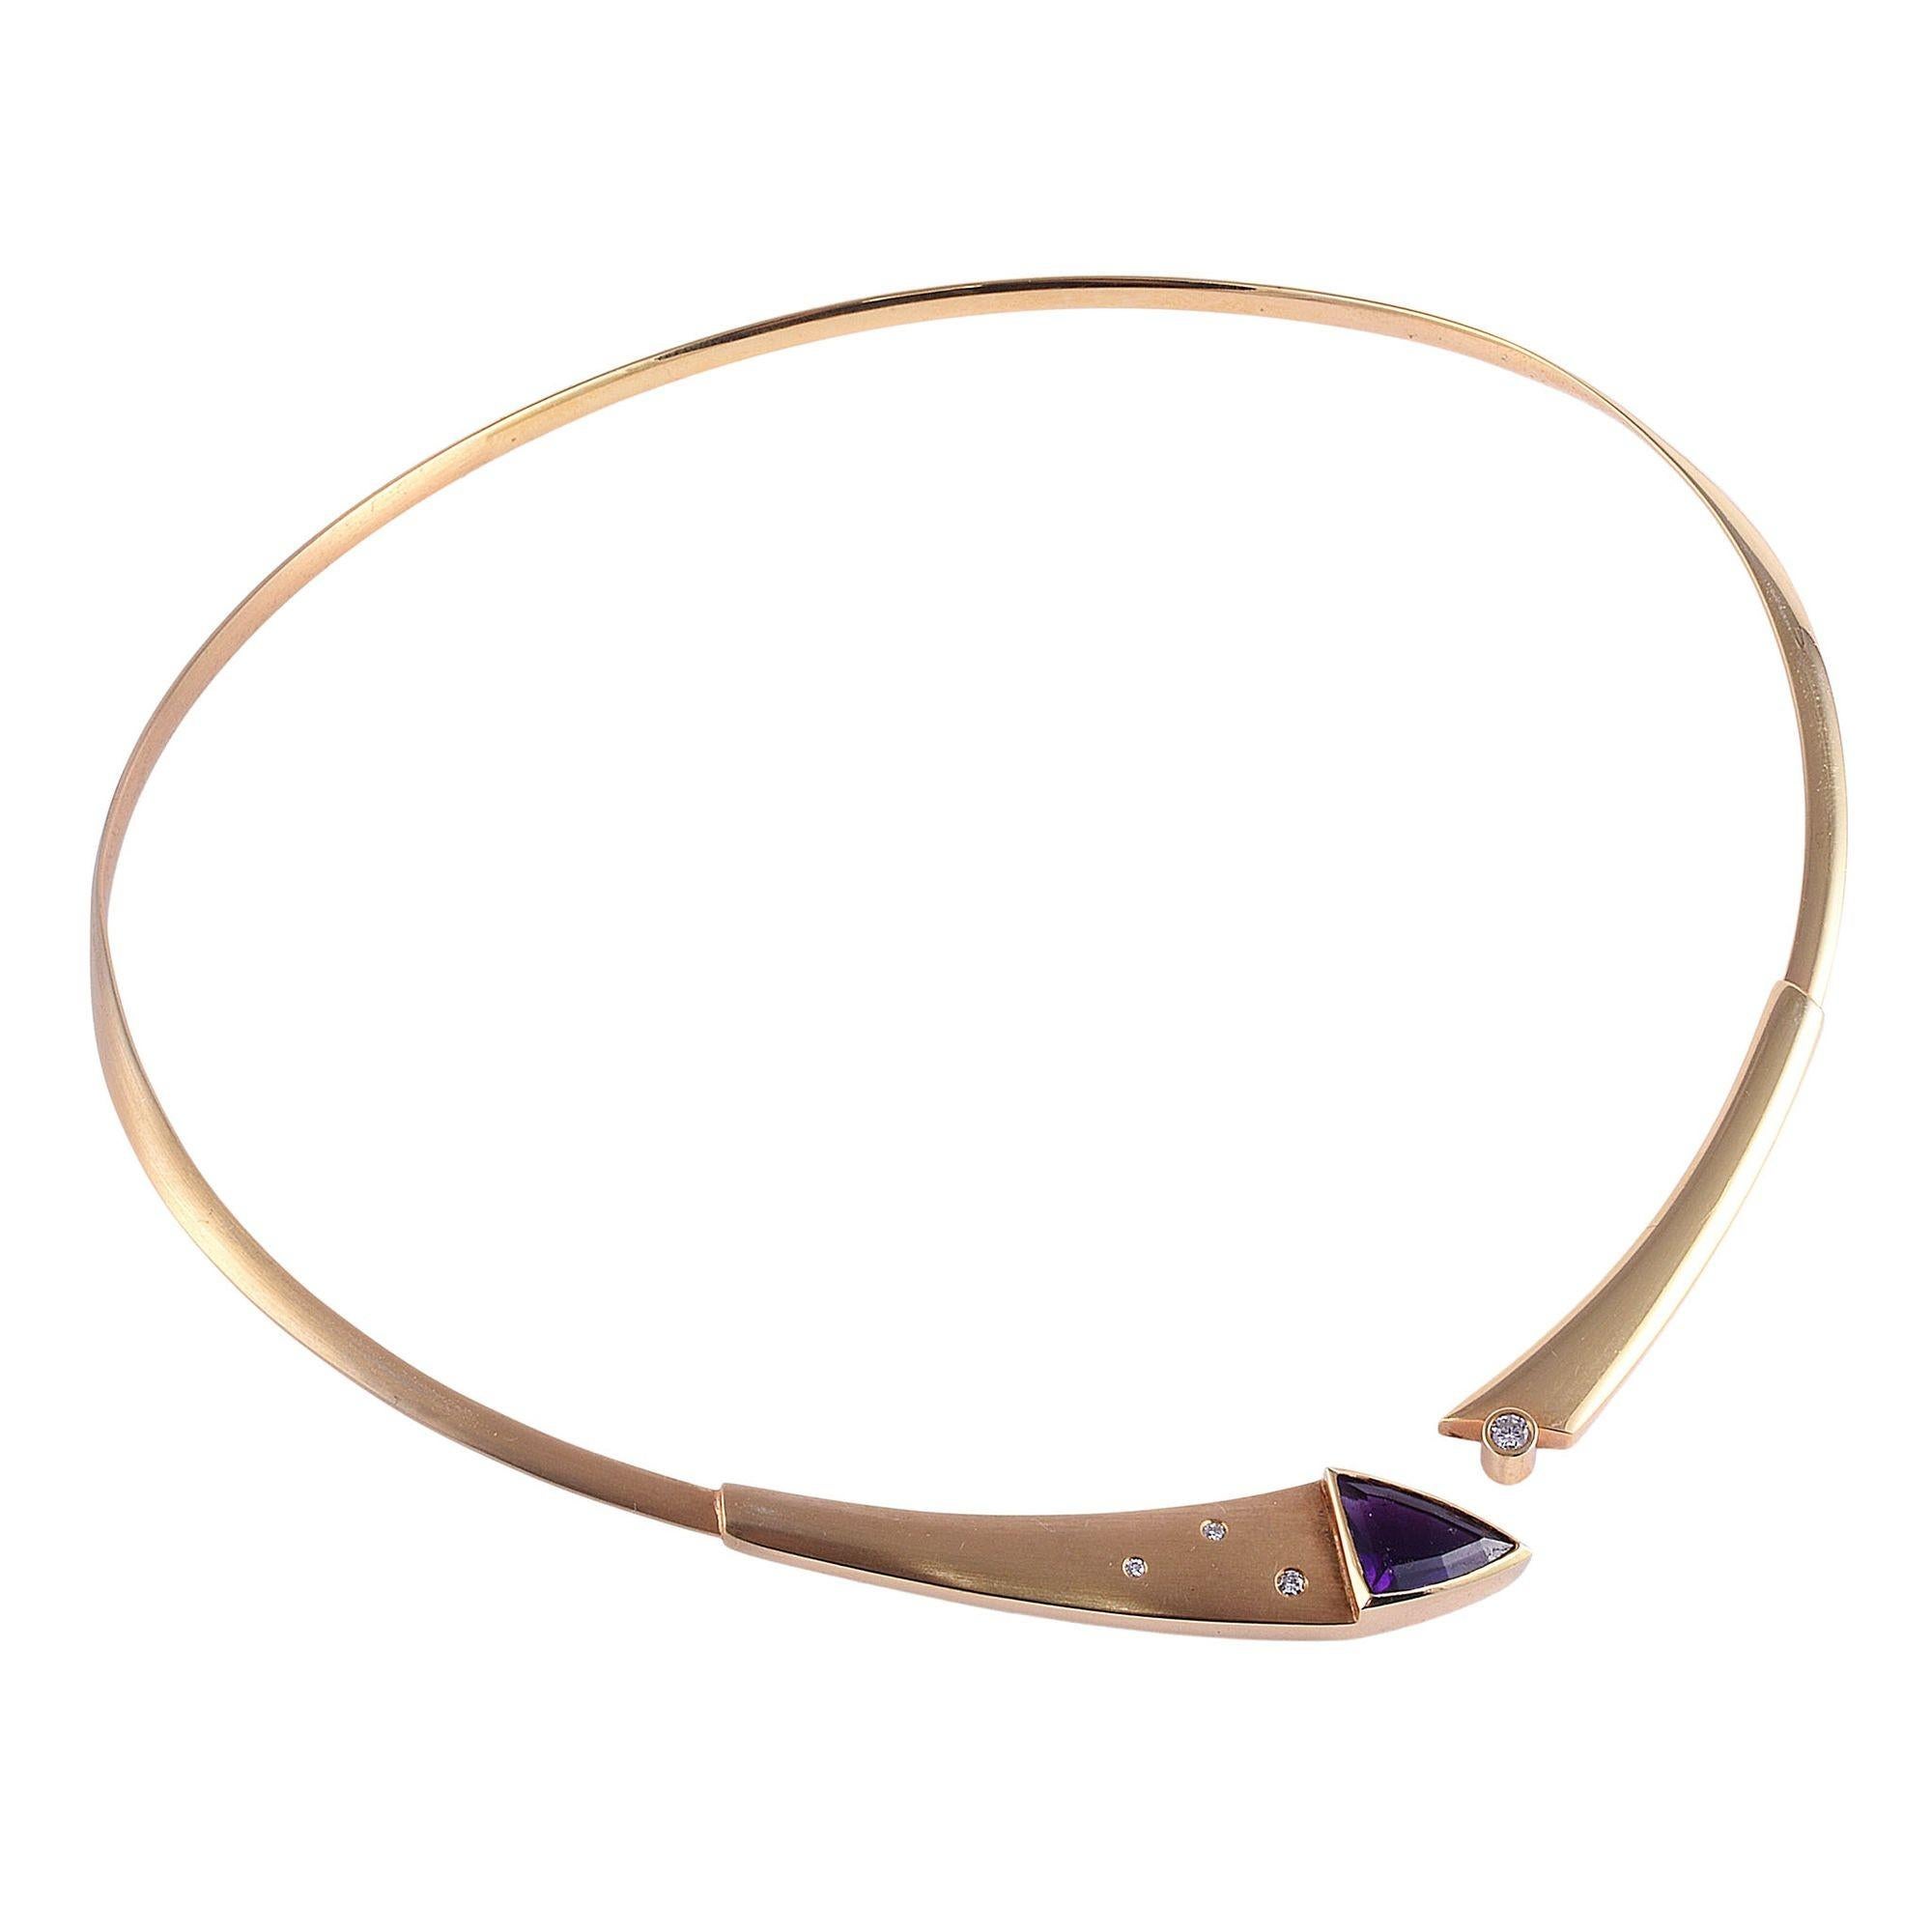 Estate custom modern design amethyst collar necklace. This striking collar necklace is of custom modern design is crafted in 14 karat yellow gold featuring a custom cut amethyst accented with diamonds. [KIMH 642]

Dimensions
Fits 16-17.5